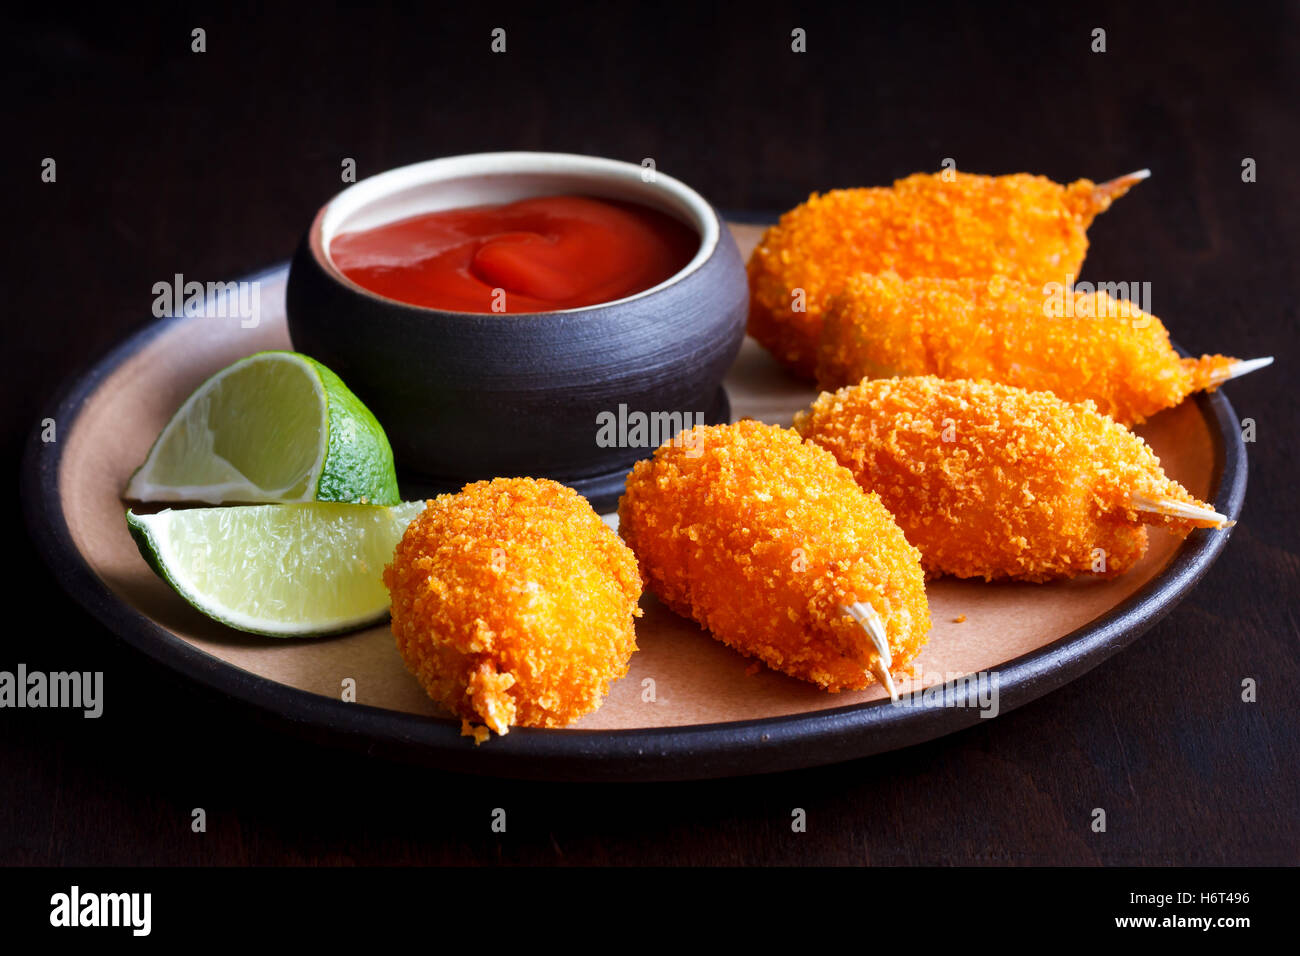 Rustic plate of fried breaded surimi crab claws with bowl of tomato sauce and lemon slices isolated on black. Stock Photo